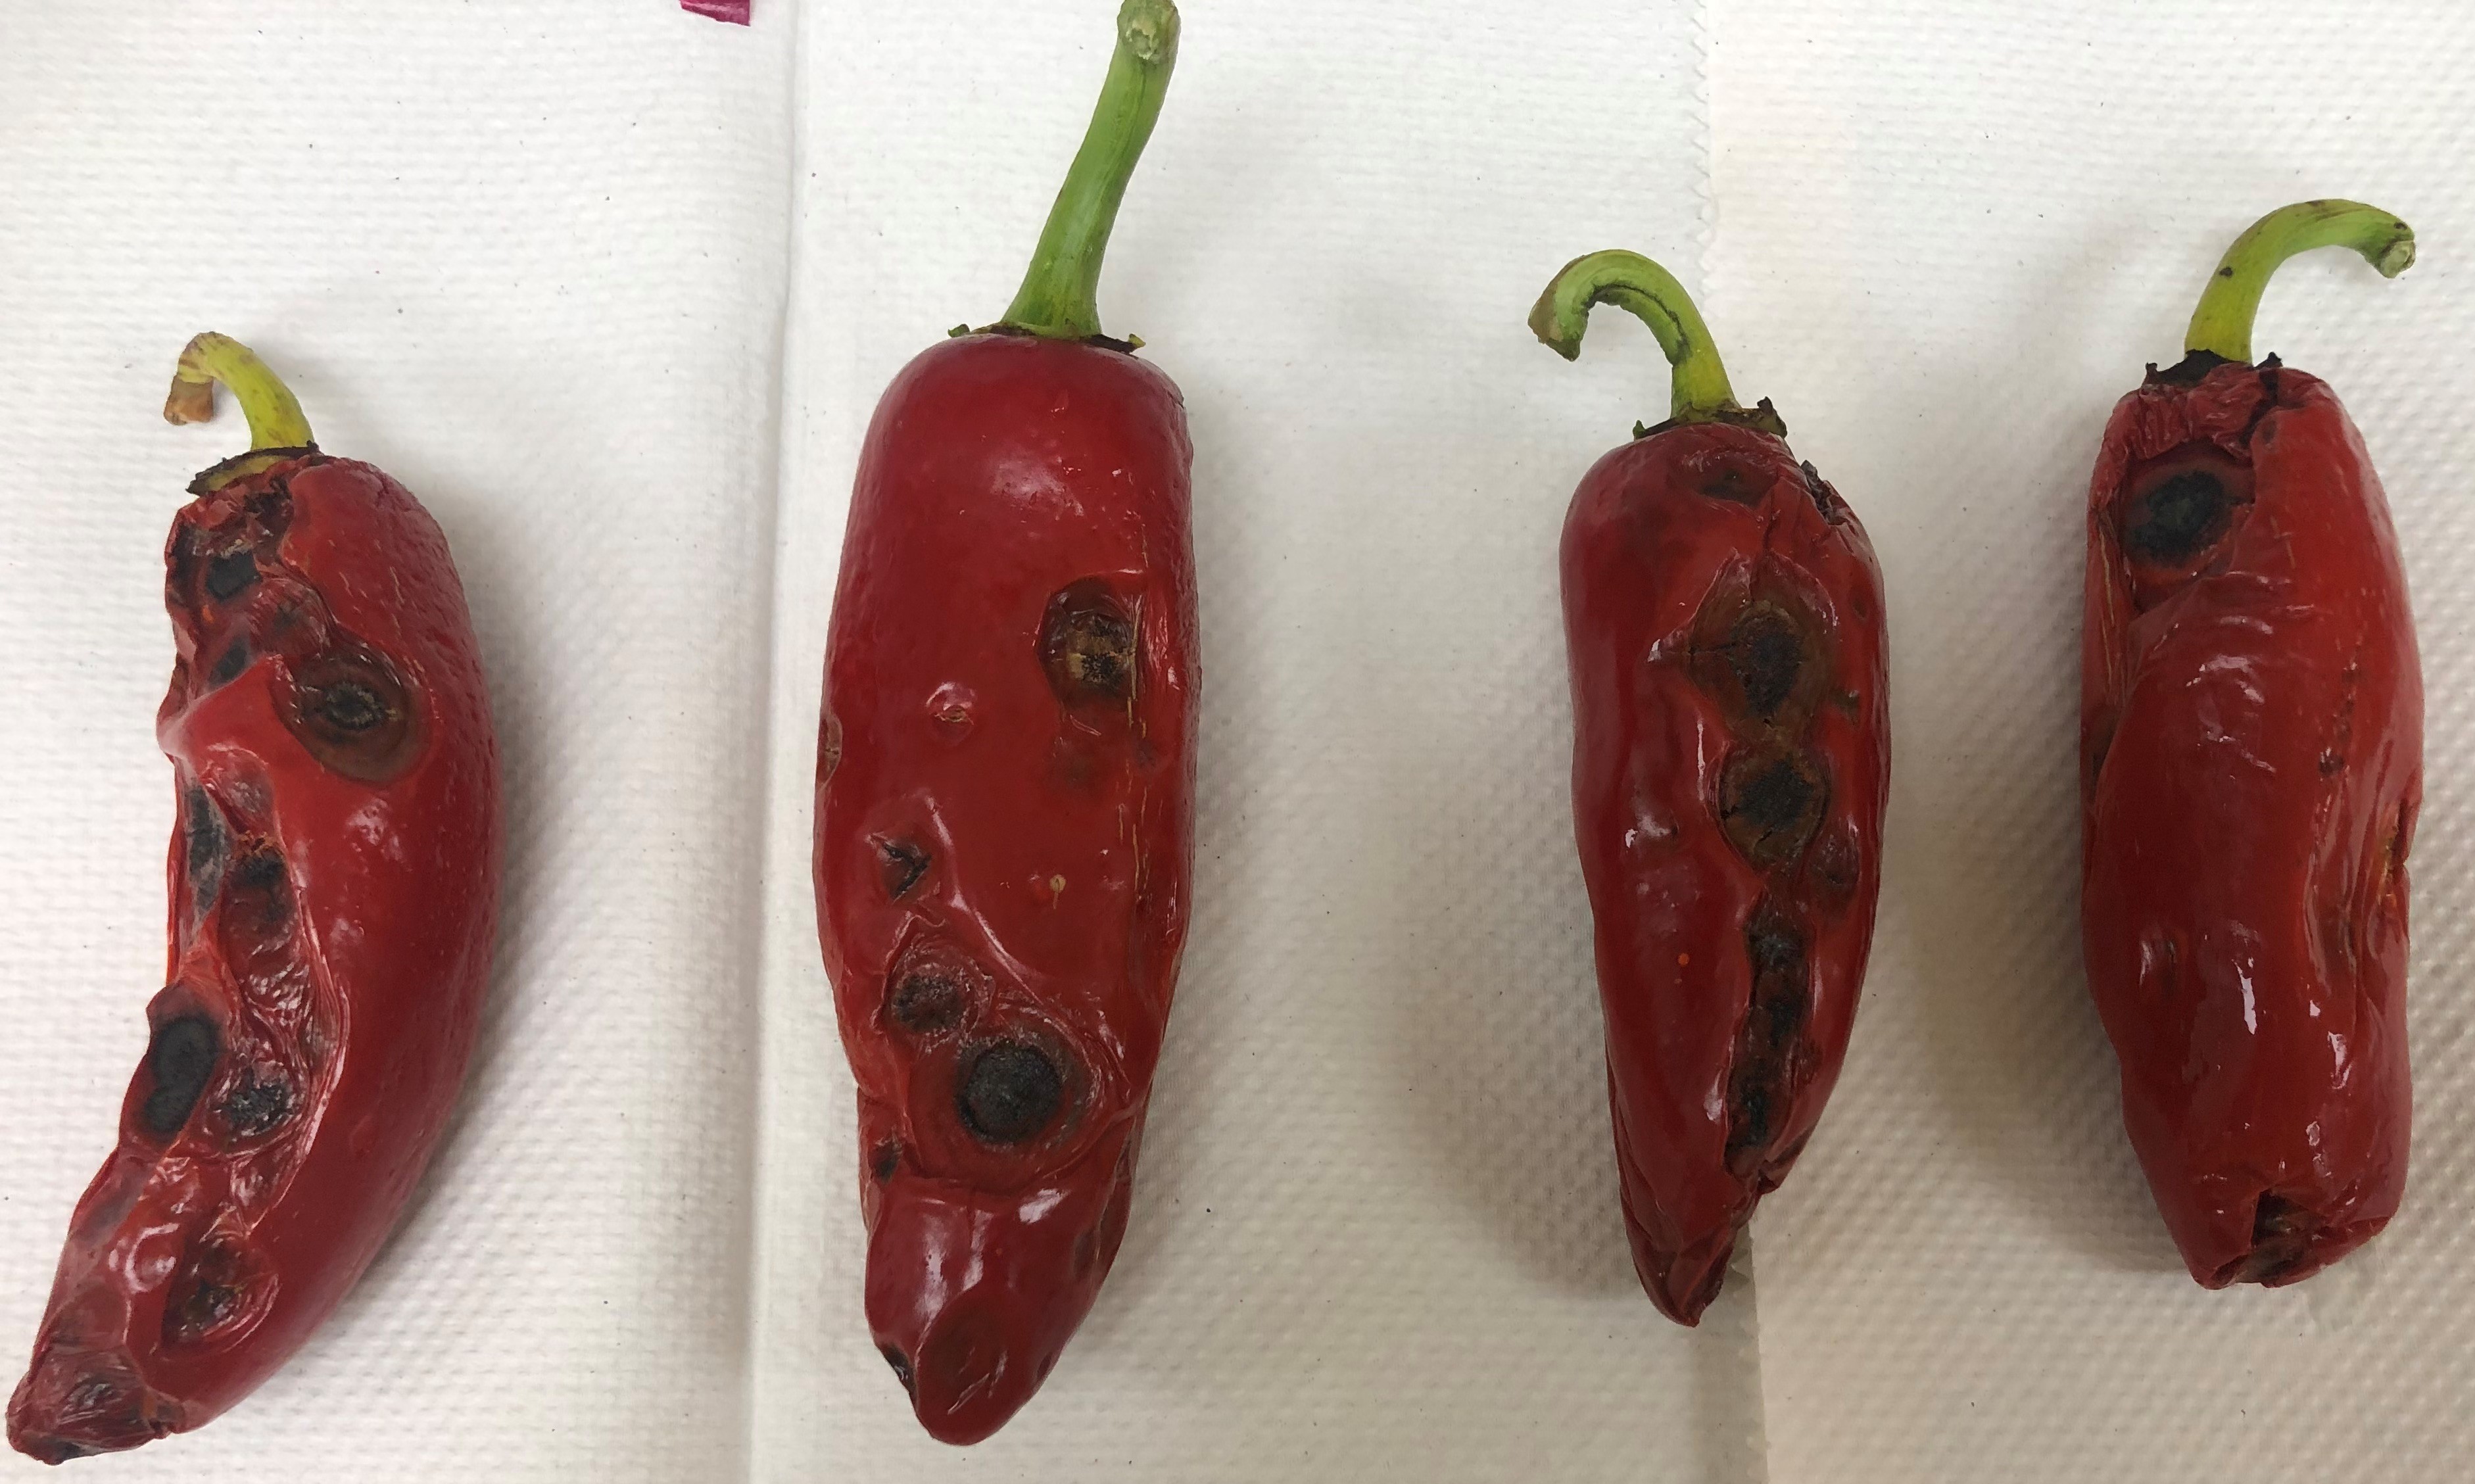 Anthracnose in pepper